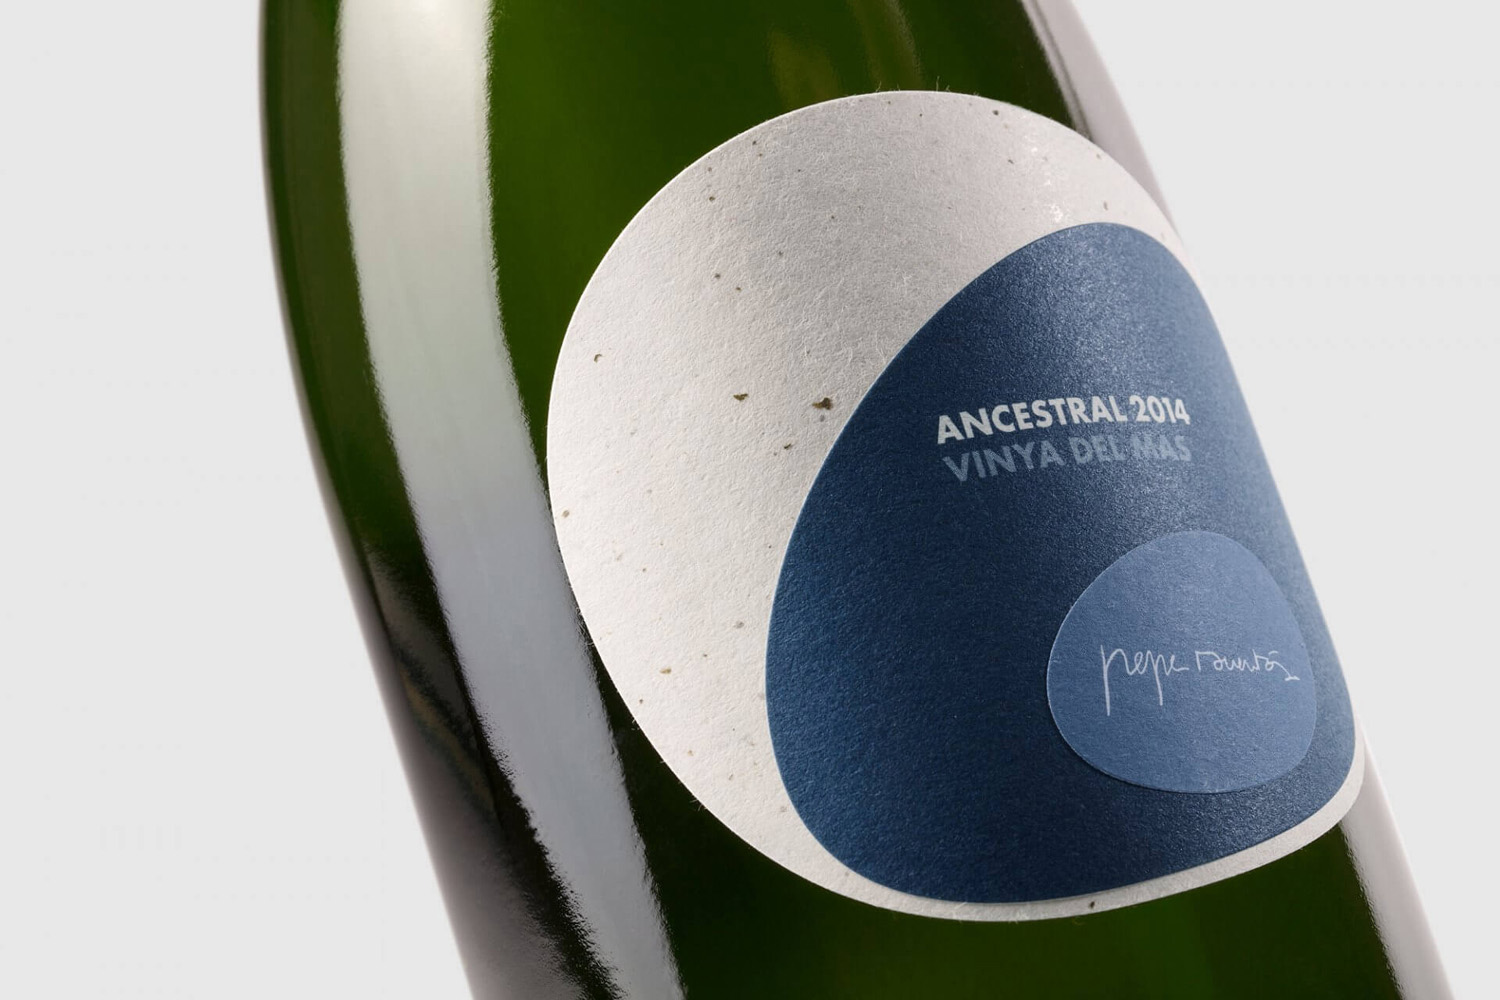 Packaging design by Mucho for natural wine range by Pepe Raventós